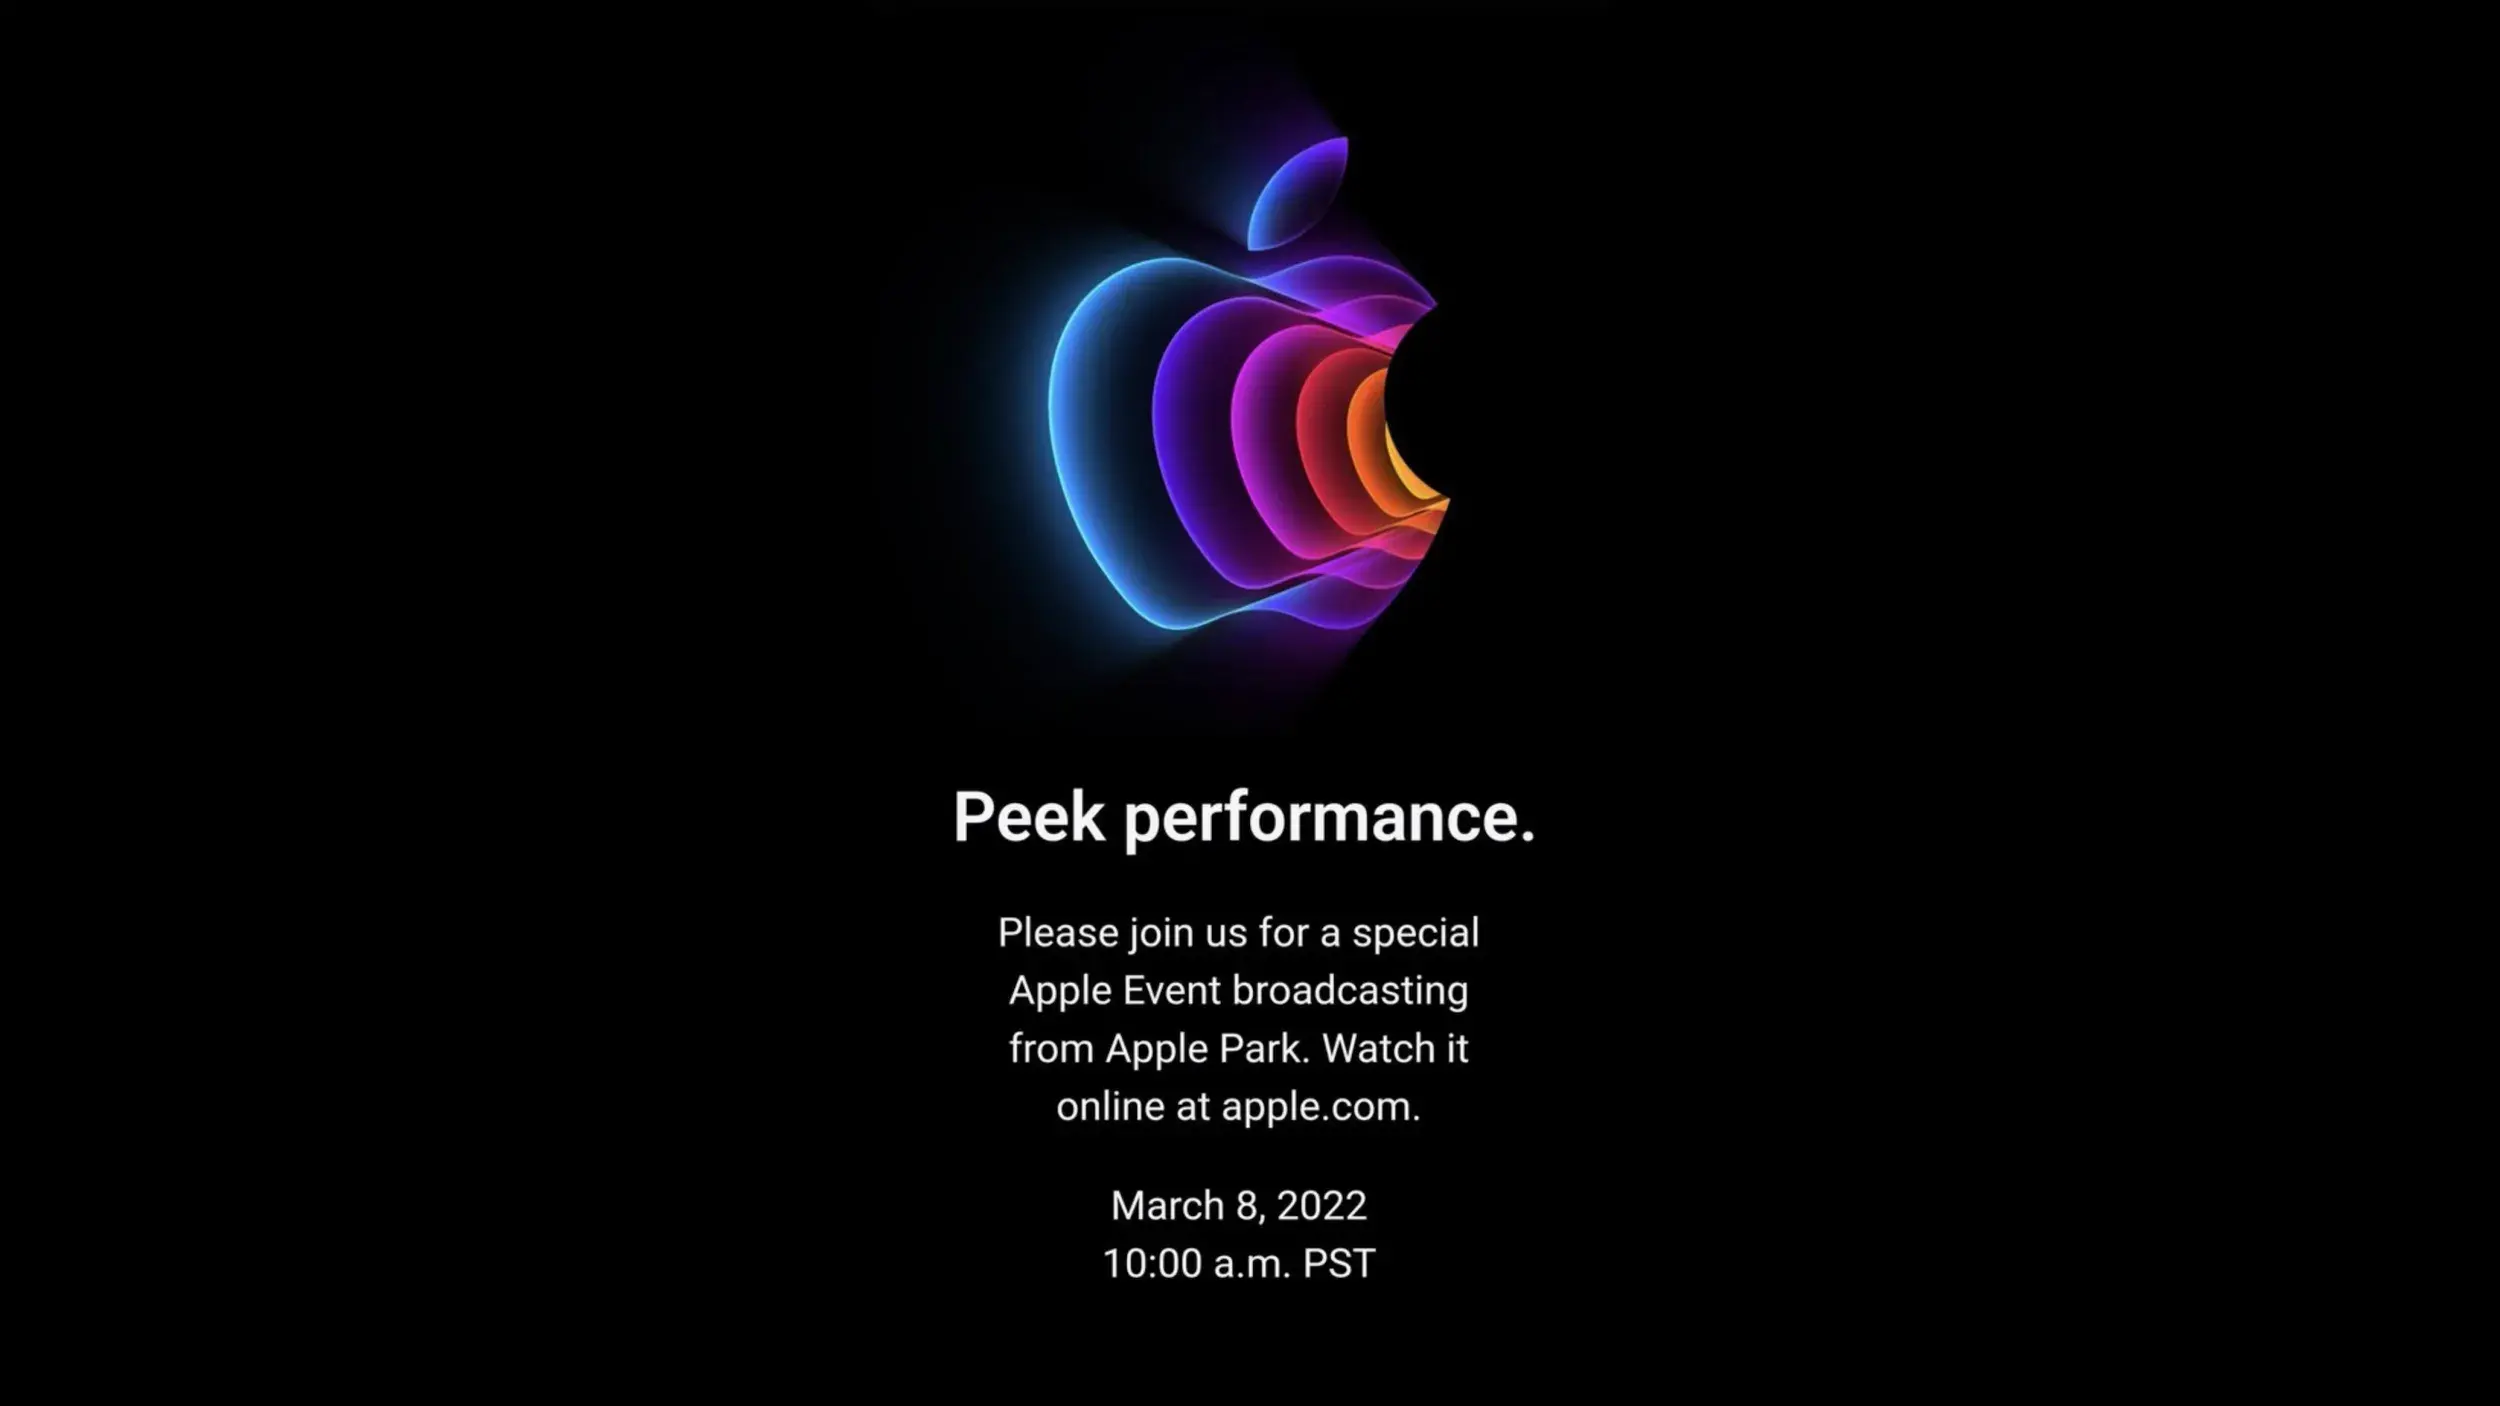 Maybe Apple's last event tagline should have been saved in September 2022? --iPhone 14 becomes iPhone 13S: Steve Jobs' masterpiece peaks, but Apple then makes Max